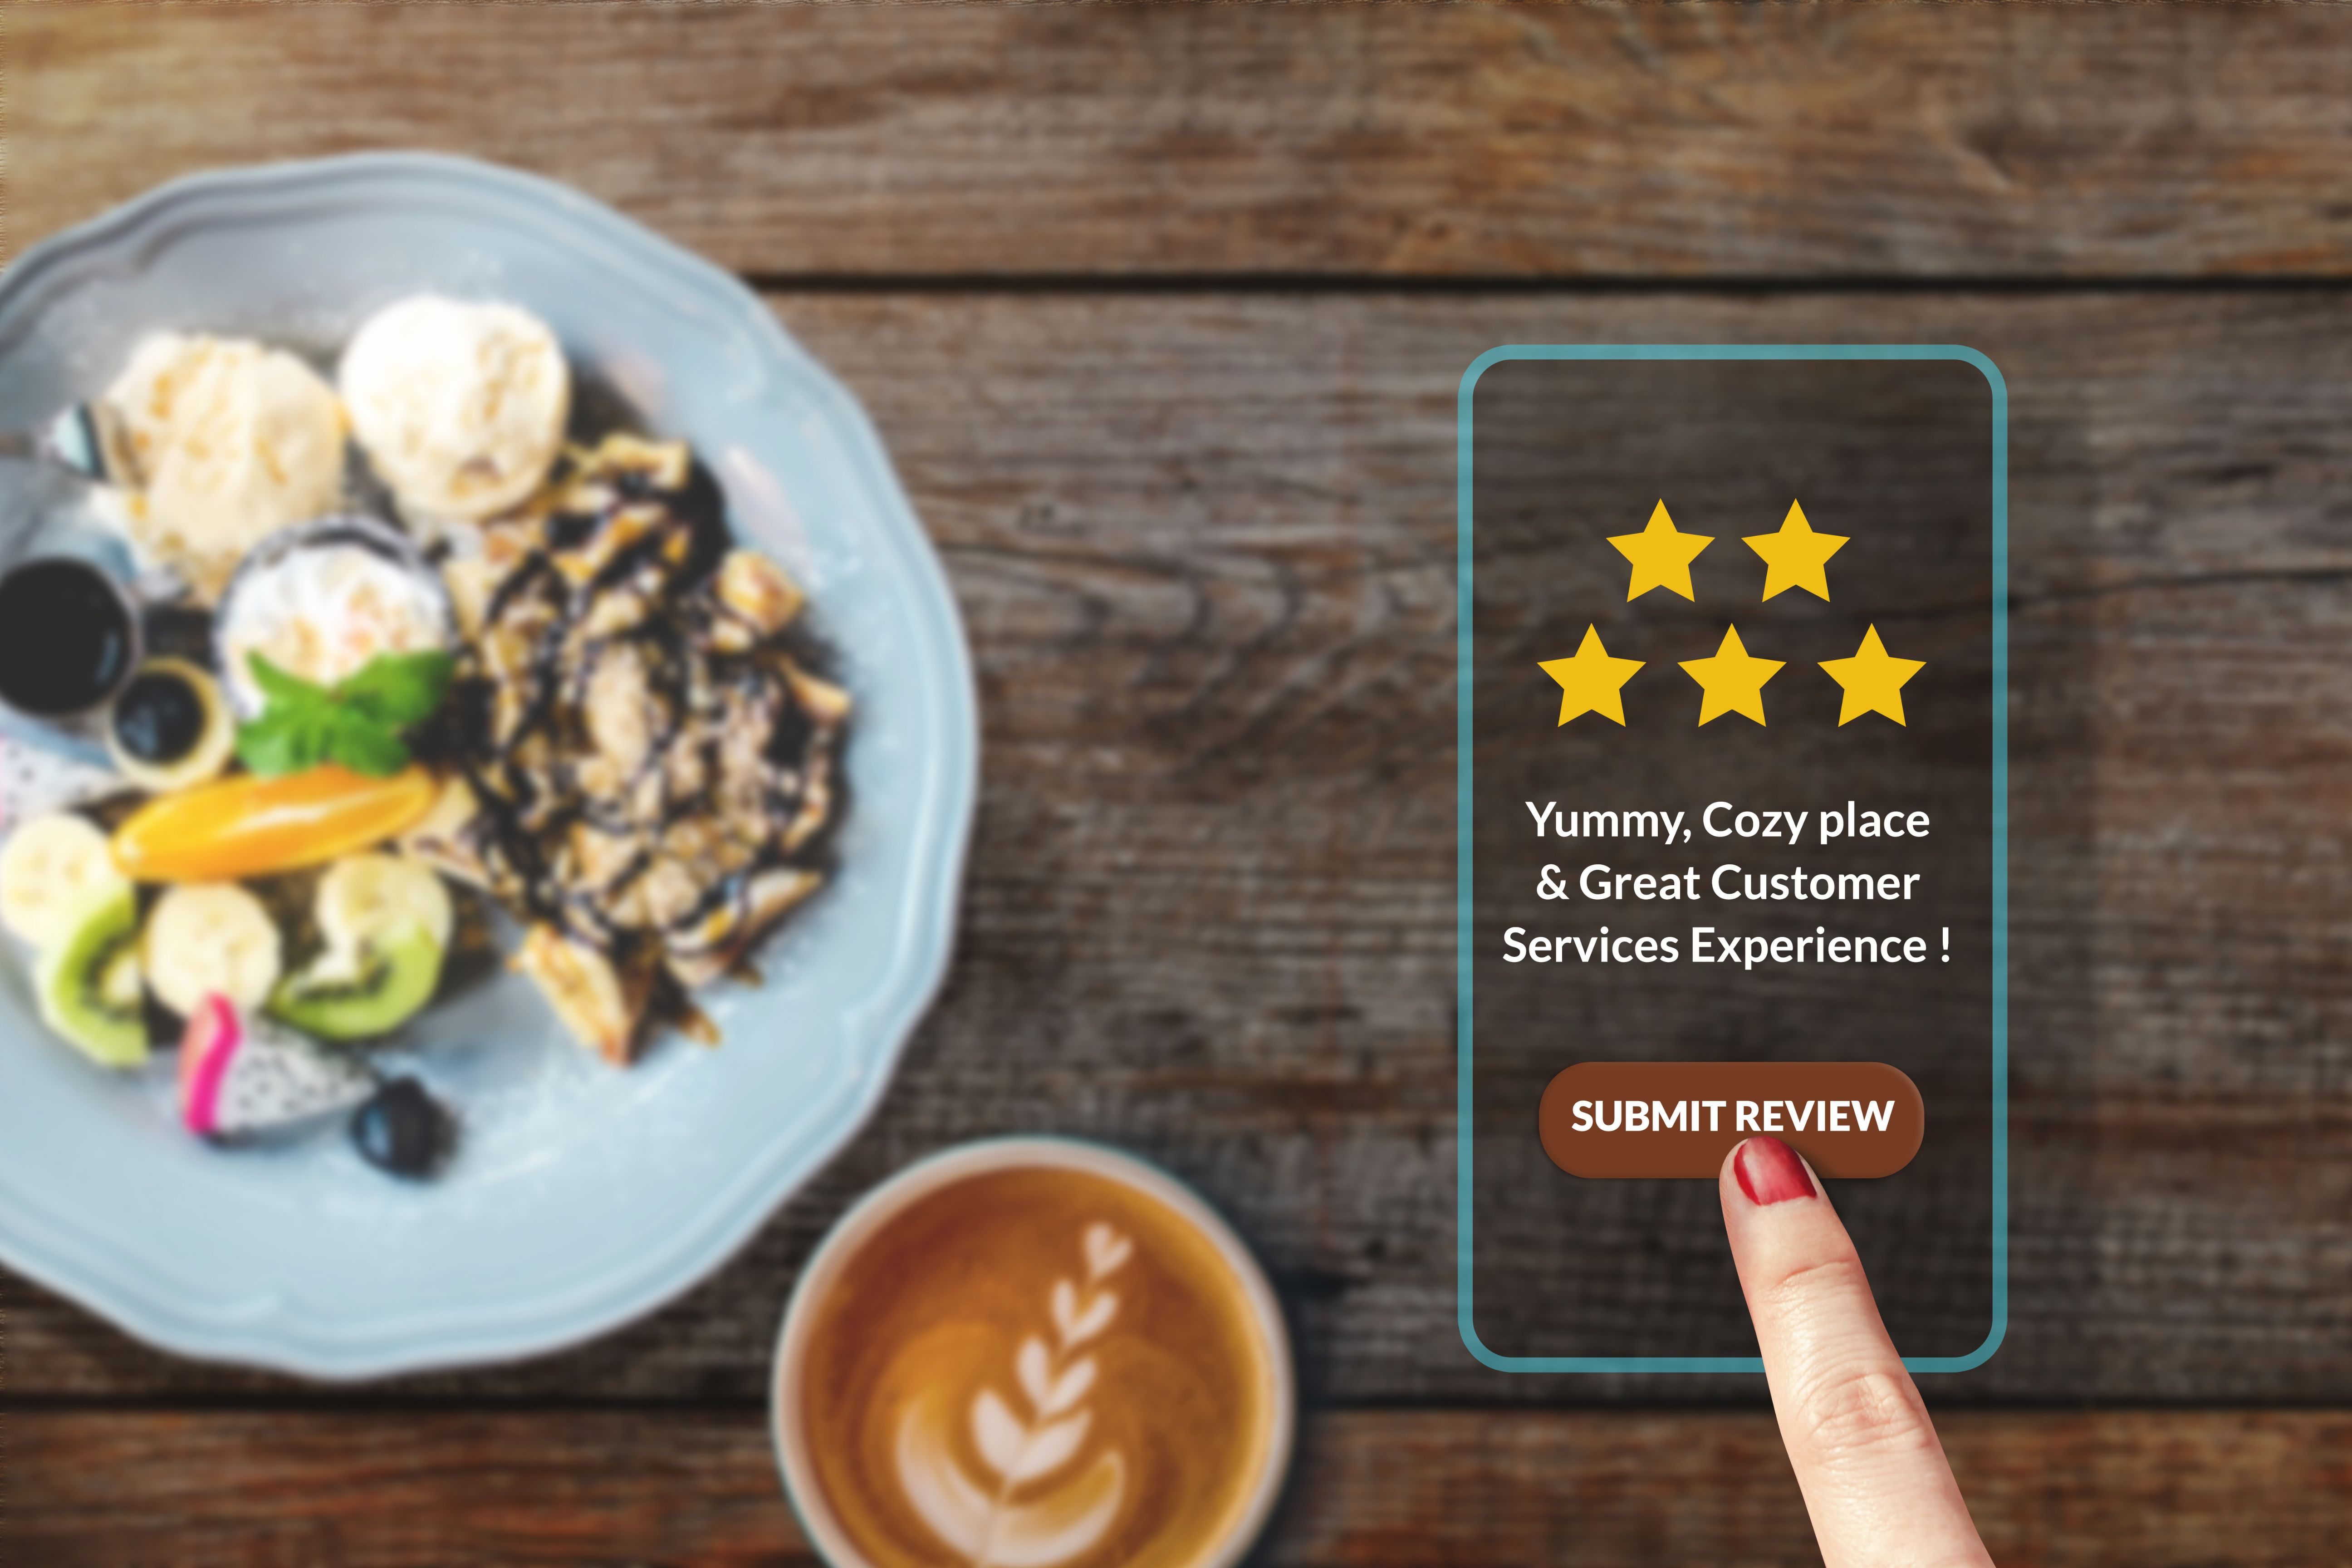 Deliver an amazing experience at your restaurant to attract repeat customers and get better reviews.